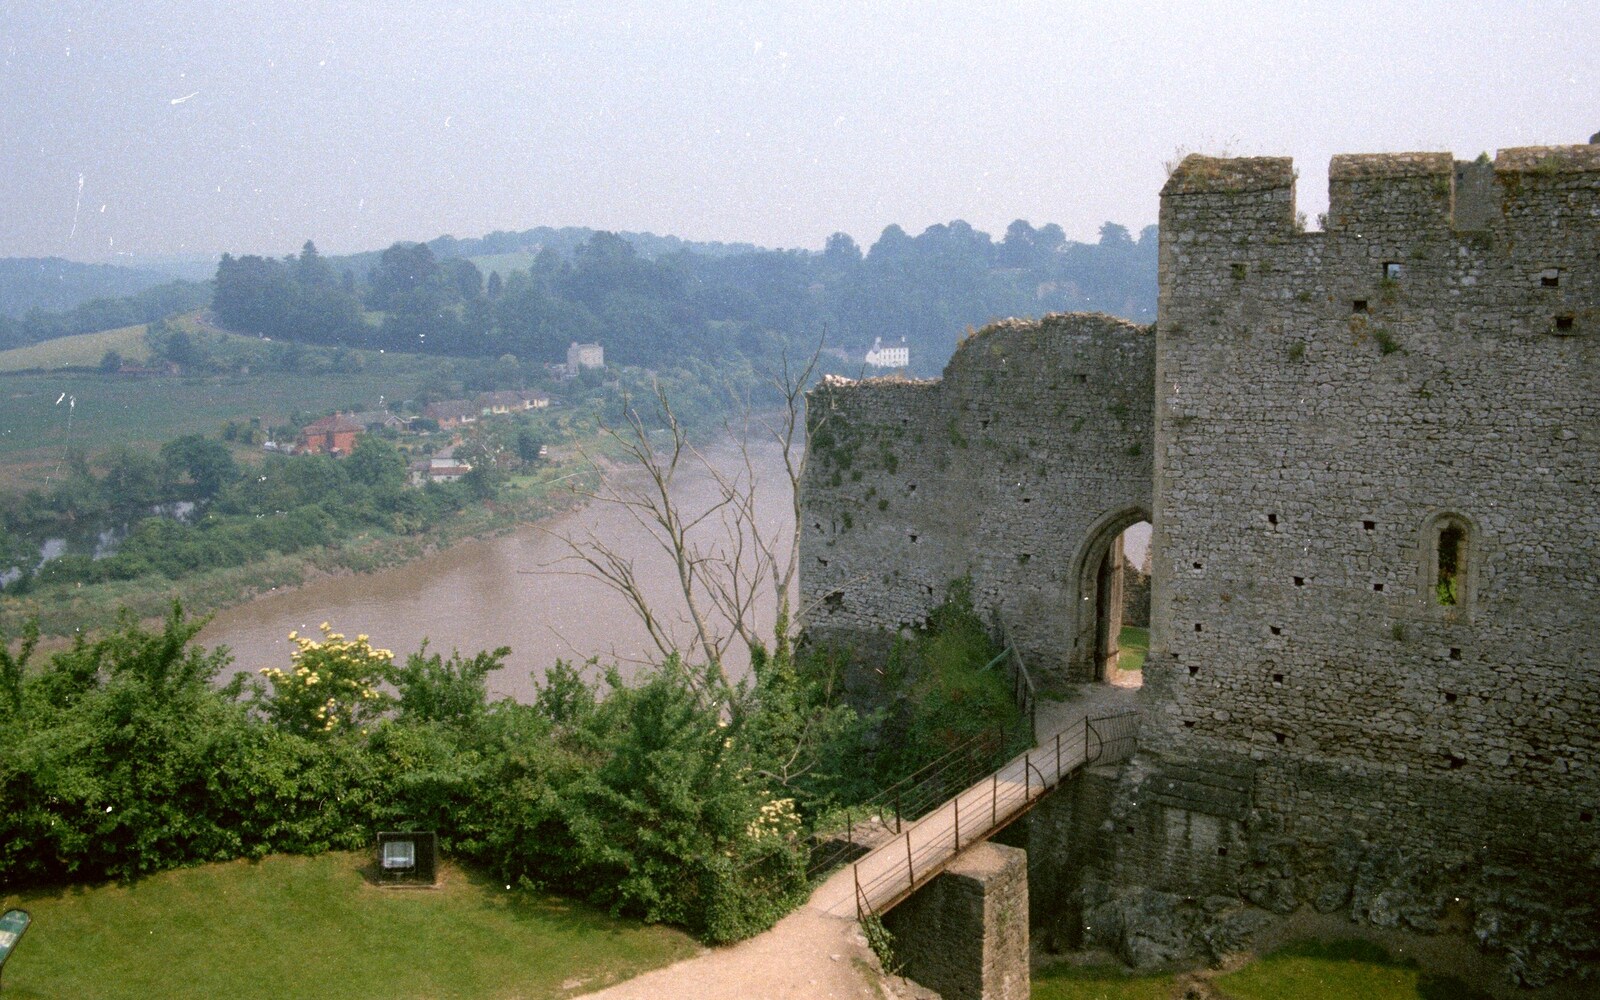 A view from the top of a castle tower from A Trip to Chepstow, Monmouthshire, Wales - 5th July 1986